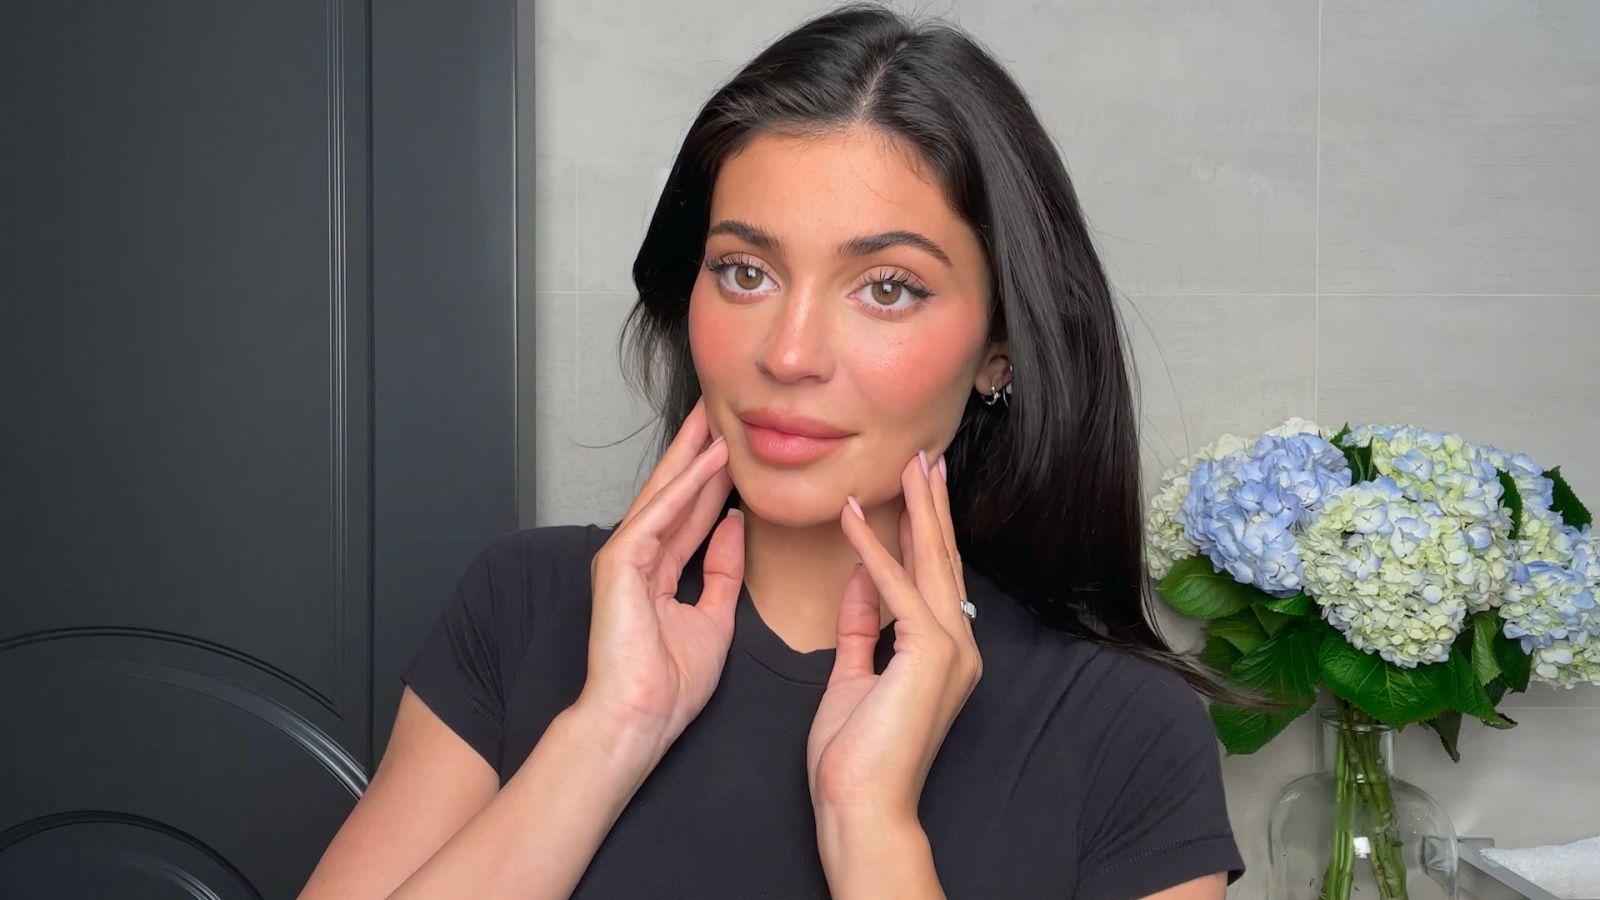 Watch Kylie Jenner Do Her New “Classic Kylie” Glam